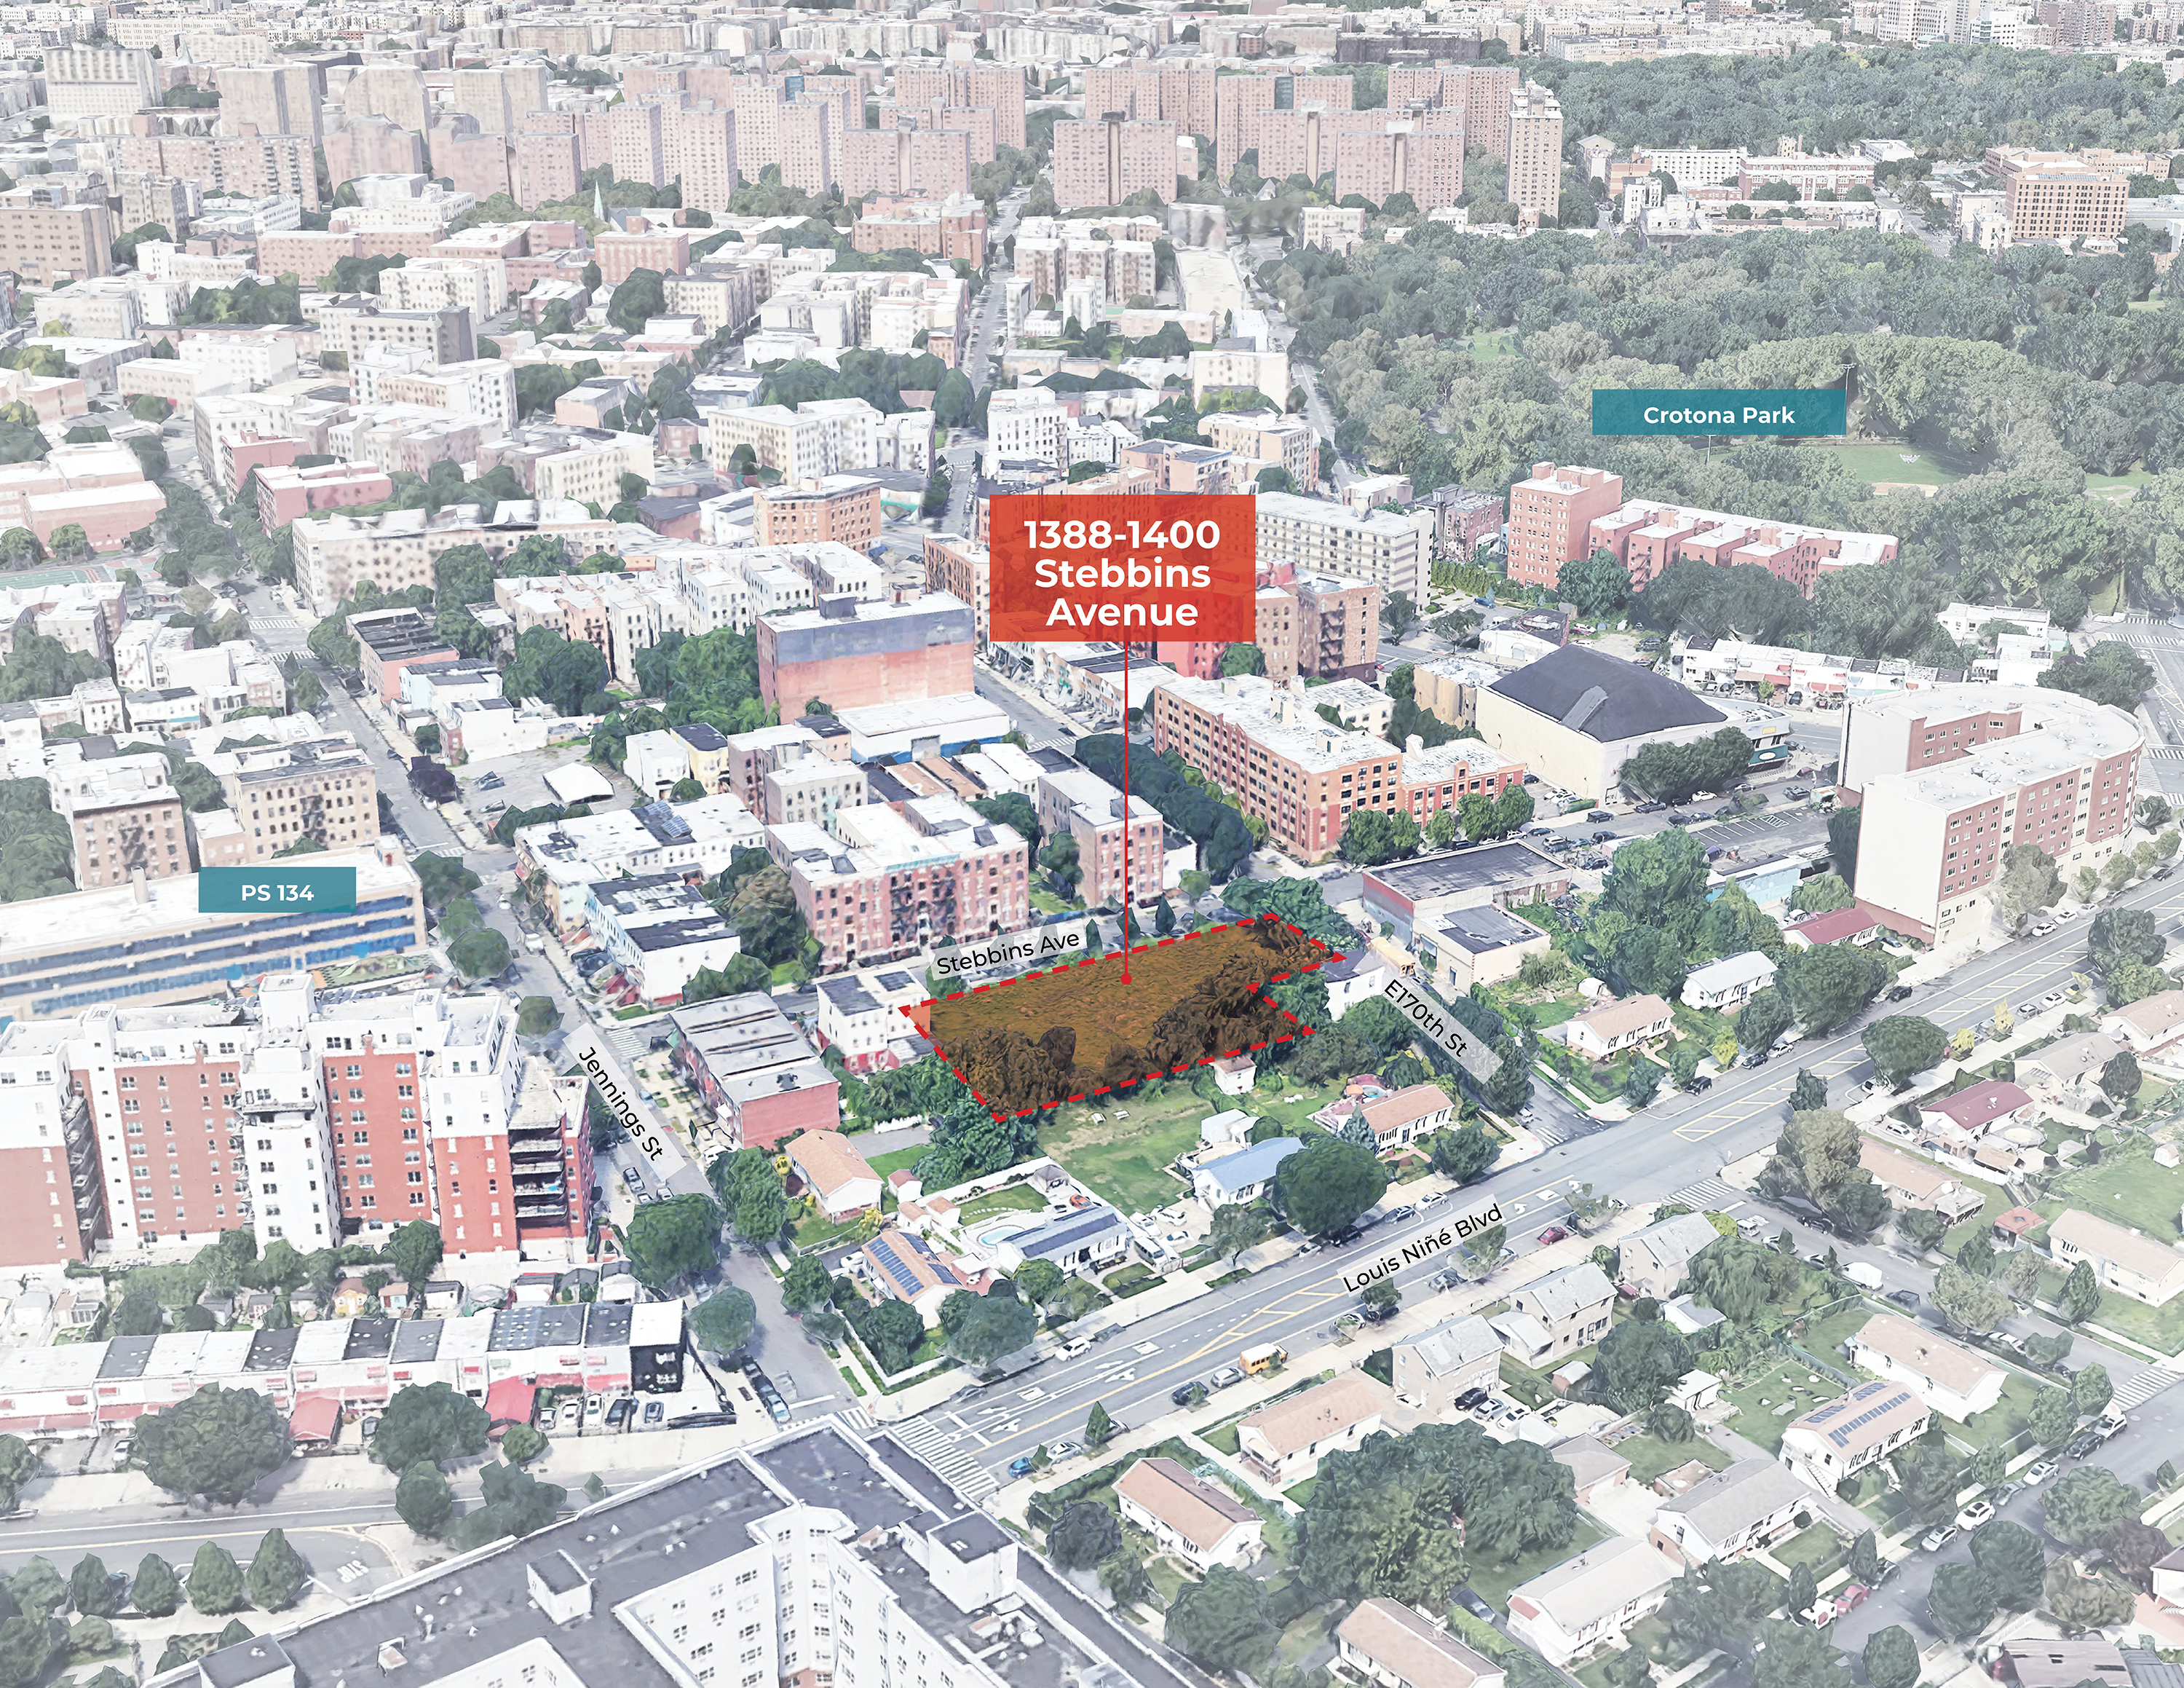 Rendering of the area for the proposed development